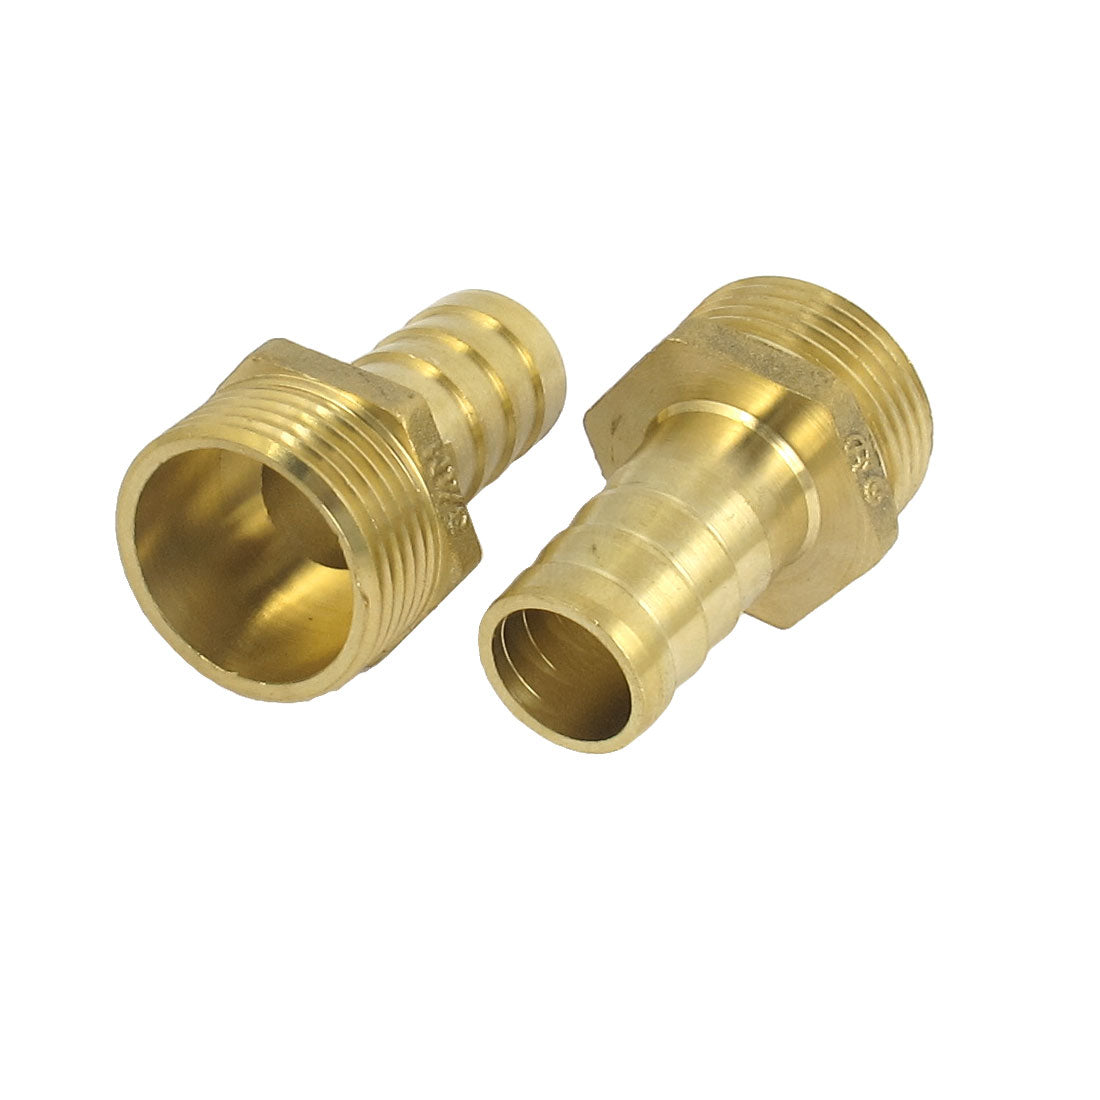 uxcell Uxcell Brass 3/4BSP Male Thread to 16mm Hose Barb Straight Fitting Adapter Coupler 2PCS